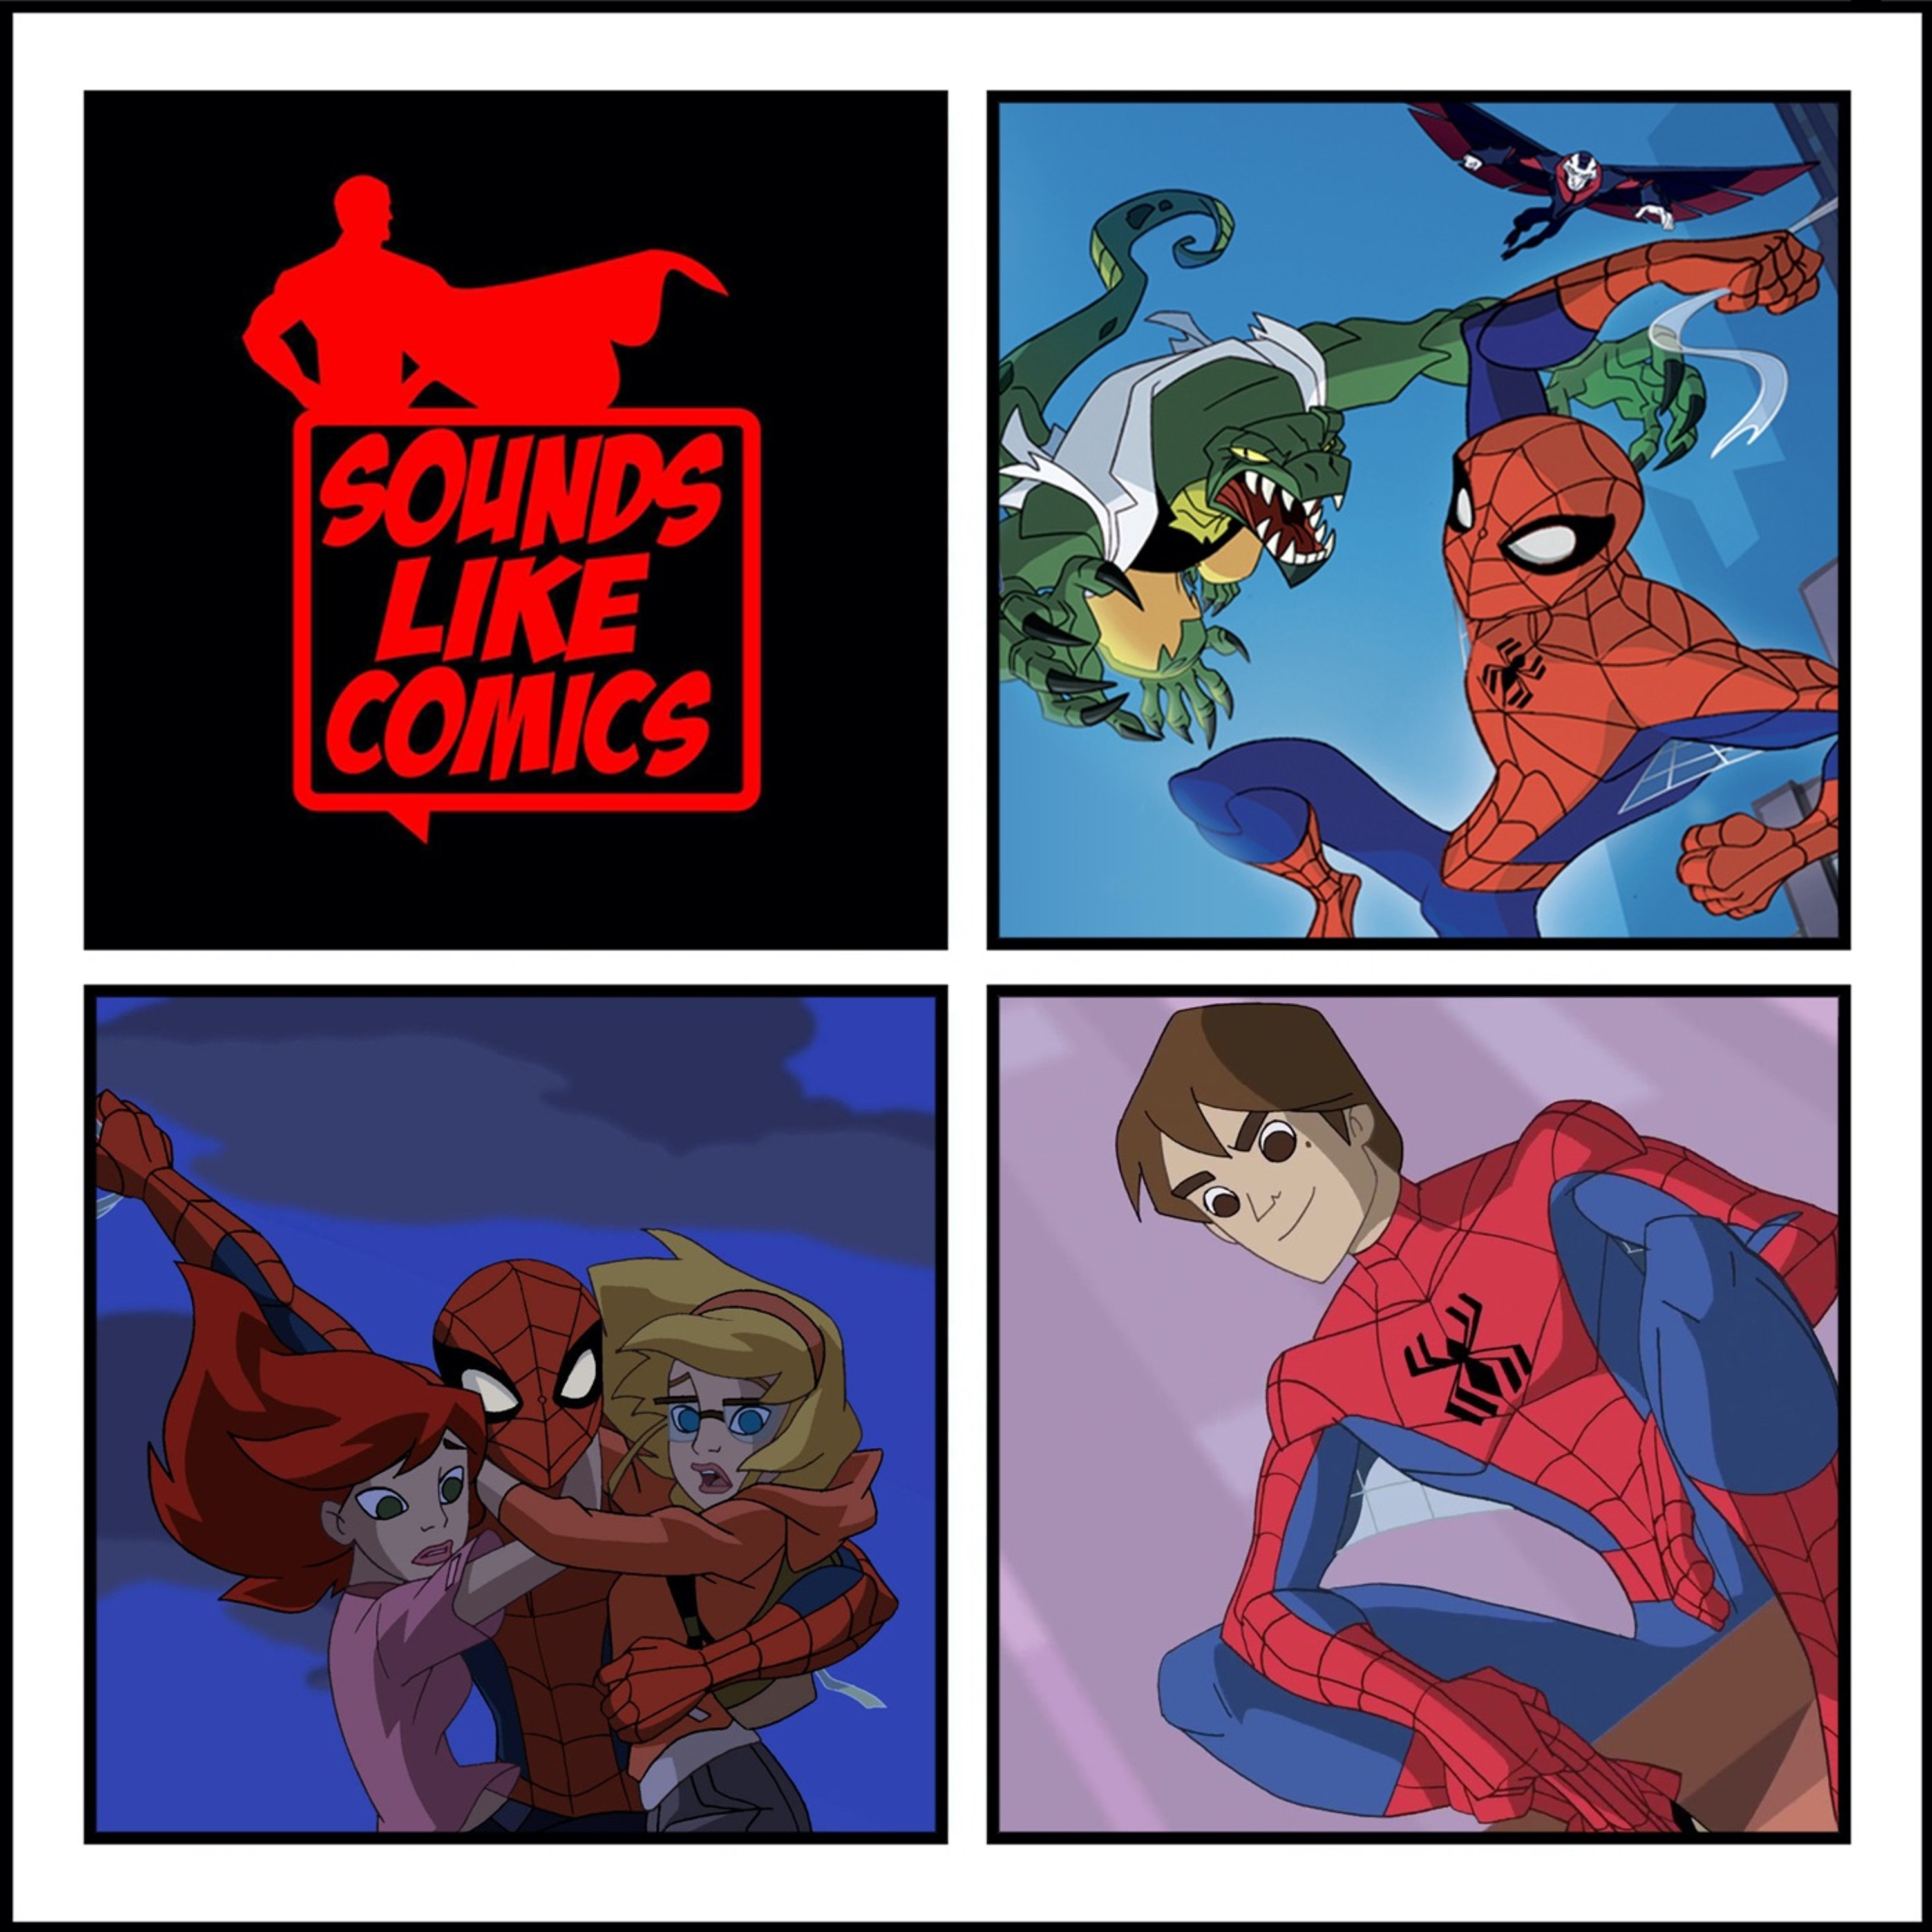 Sounds Like Comics Ep 138 - The Spectacular Spider-Man (TV Series 2008 - 2009)